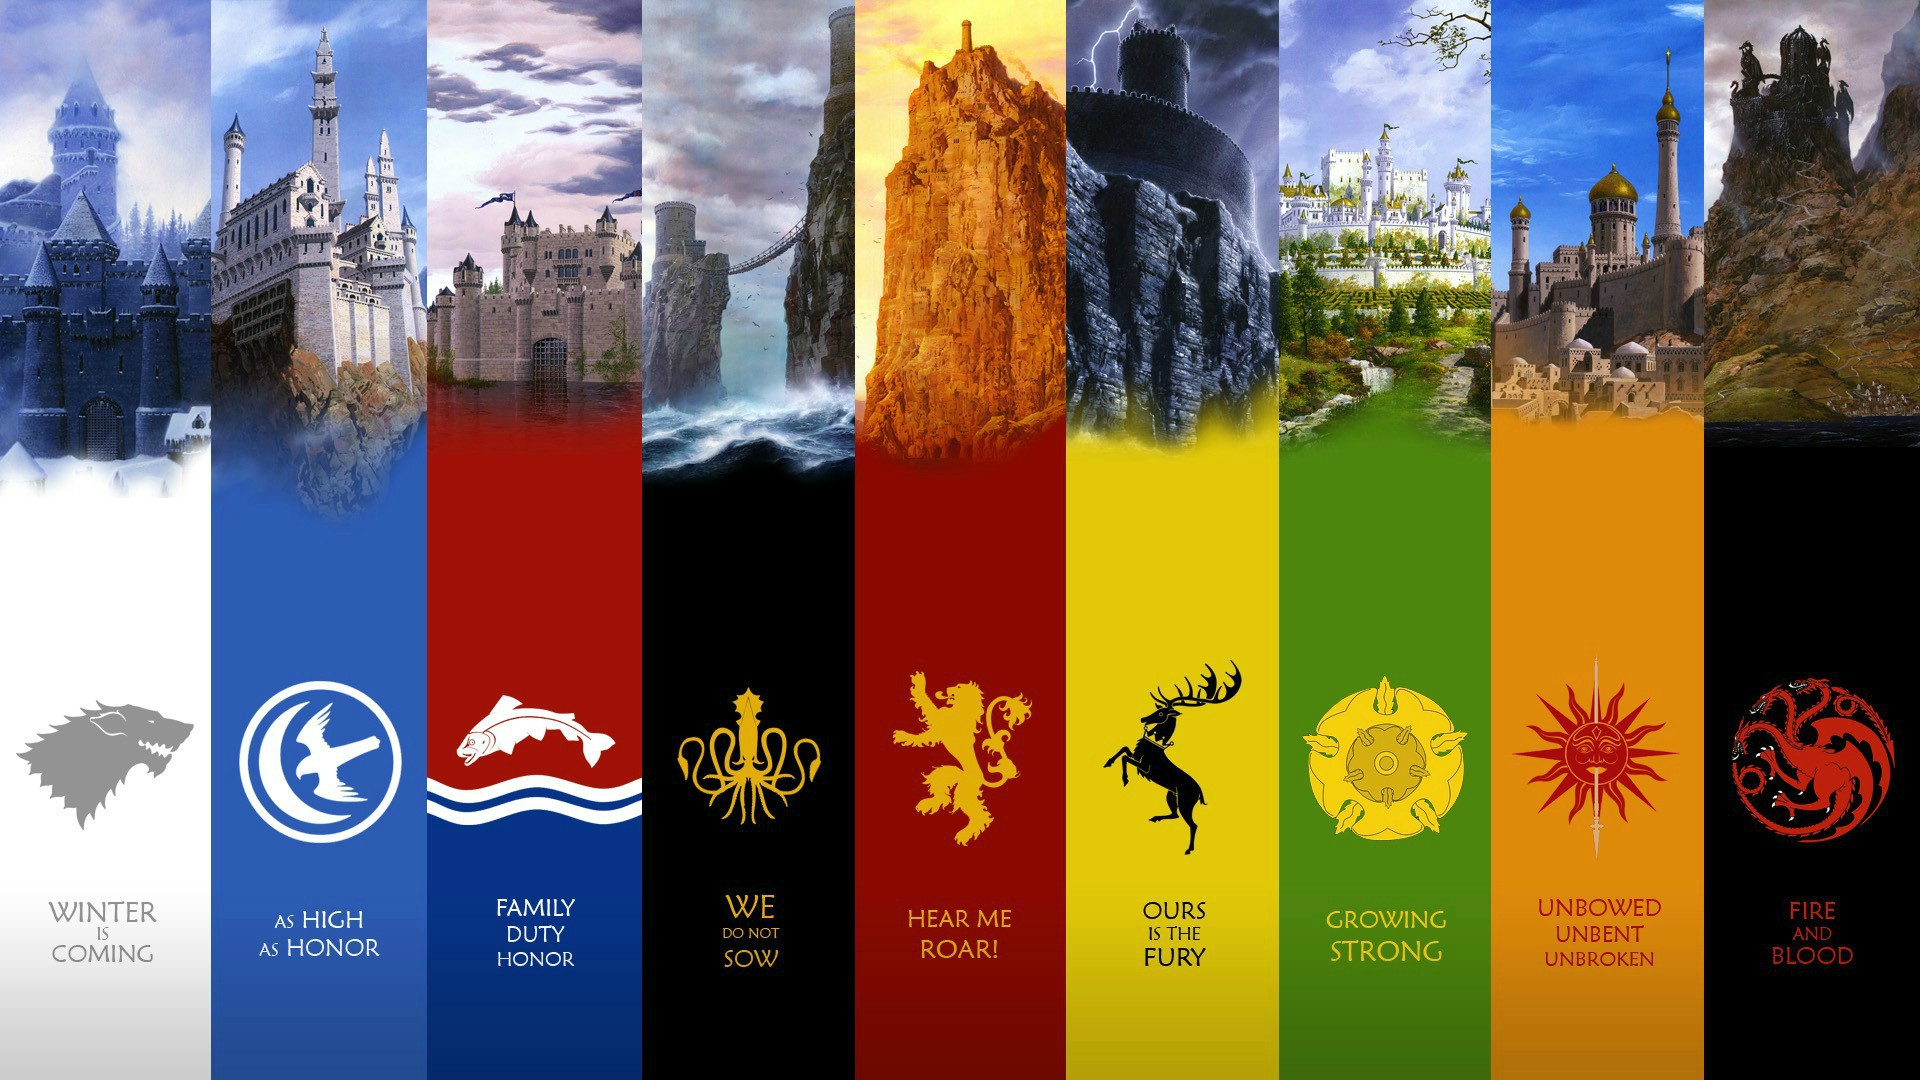 The World Of Ice & Fire Wallpapers